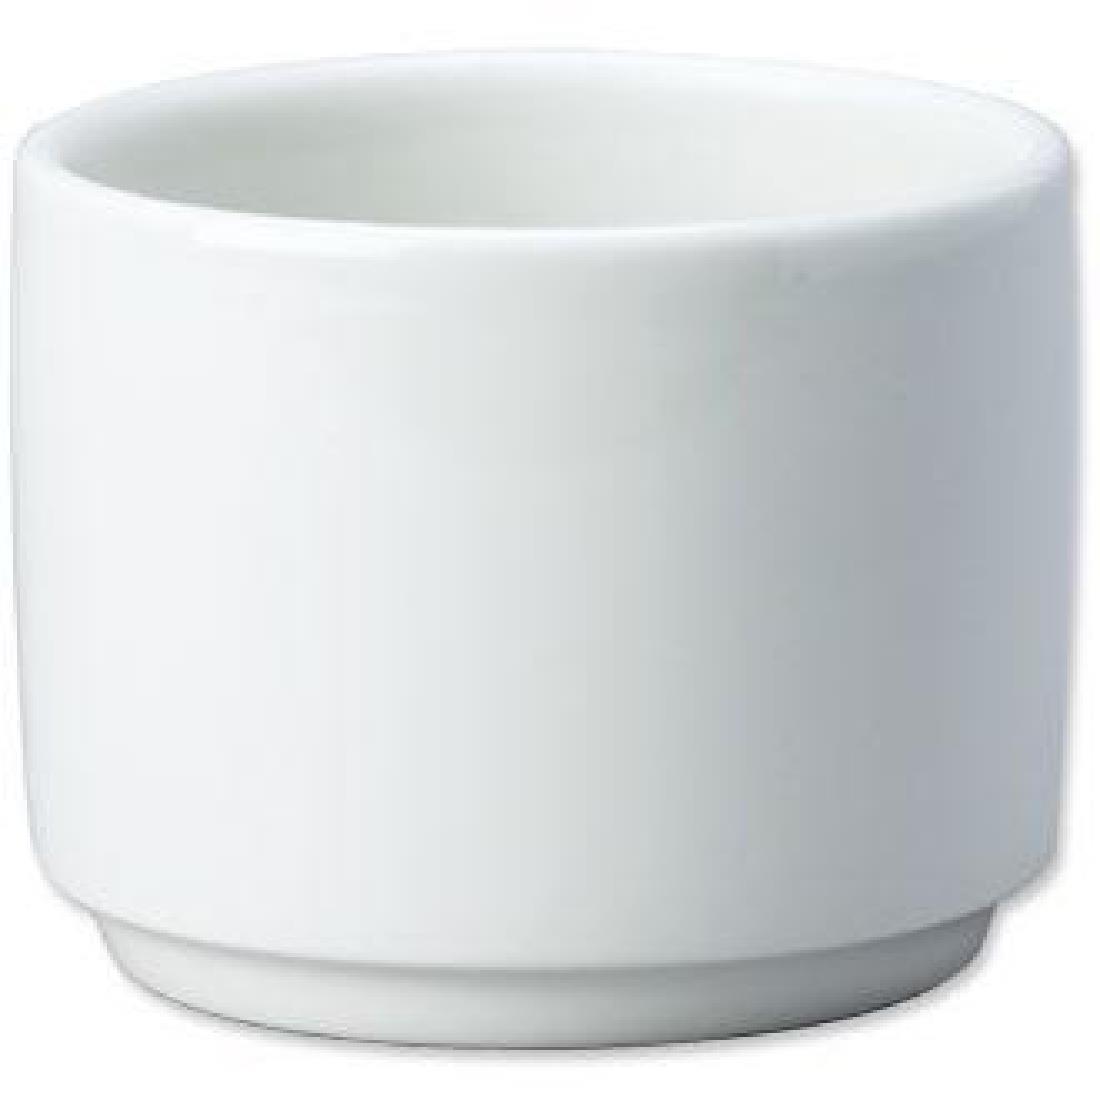 Churchill Compact Open Sugar Bowls 212ml (Pack of 12) - CA966  - 1